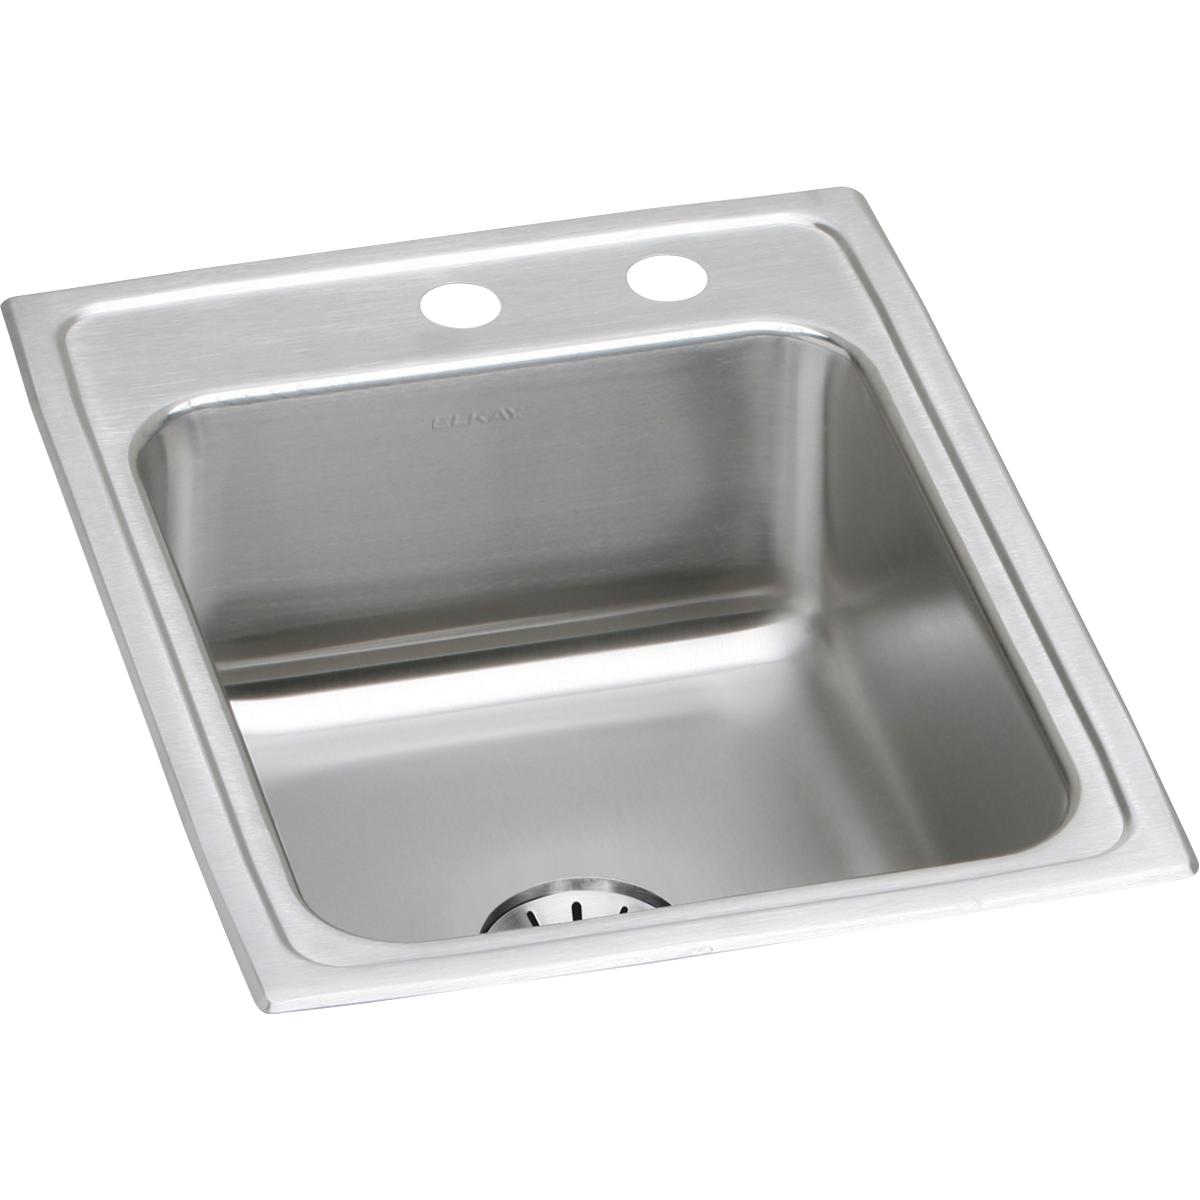 Elkay Lustertone Classic 17" x 22" x 7-5/8" MR2-Hole Single Bowl Drop-in Sink with Perfect Drain